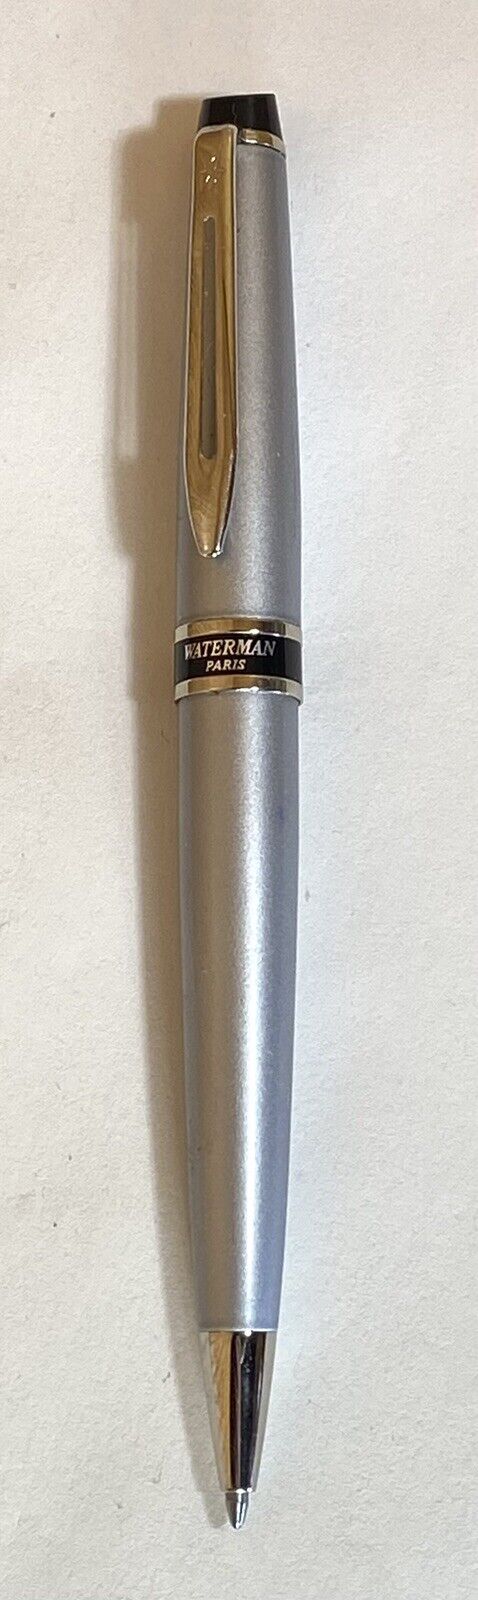 Waterman Paris France Rollerball or Ballpoint Stainless Silver Expert Works.